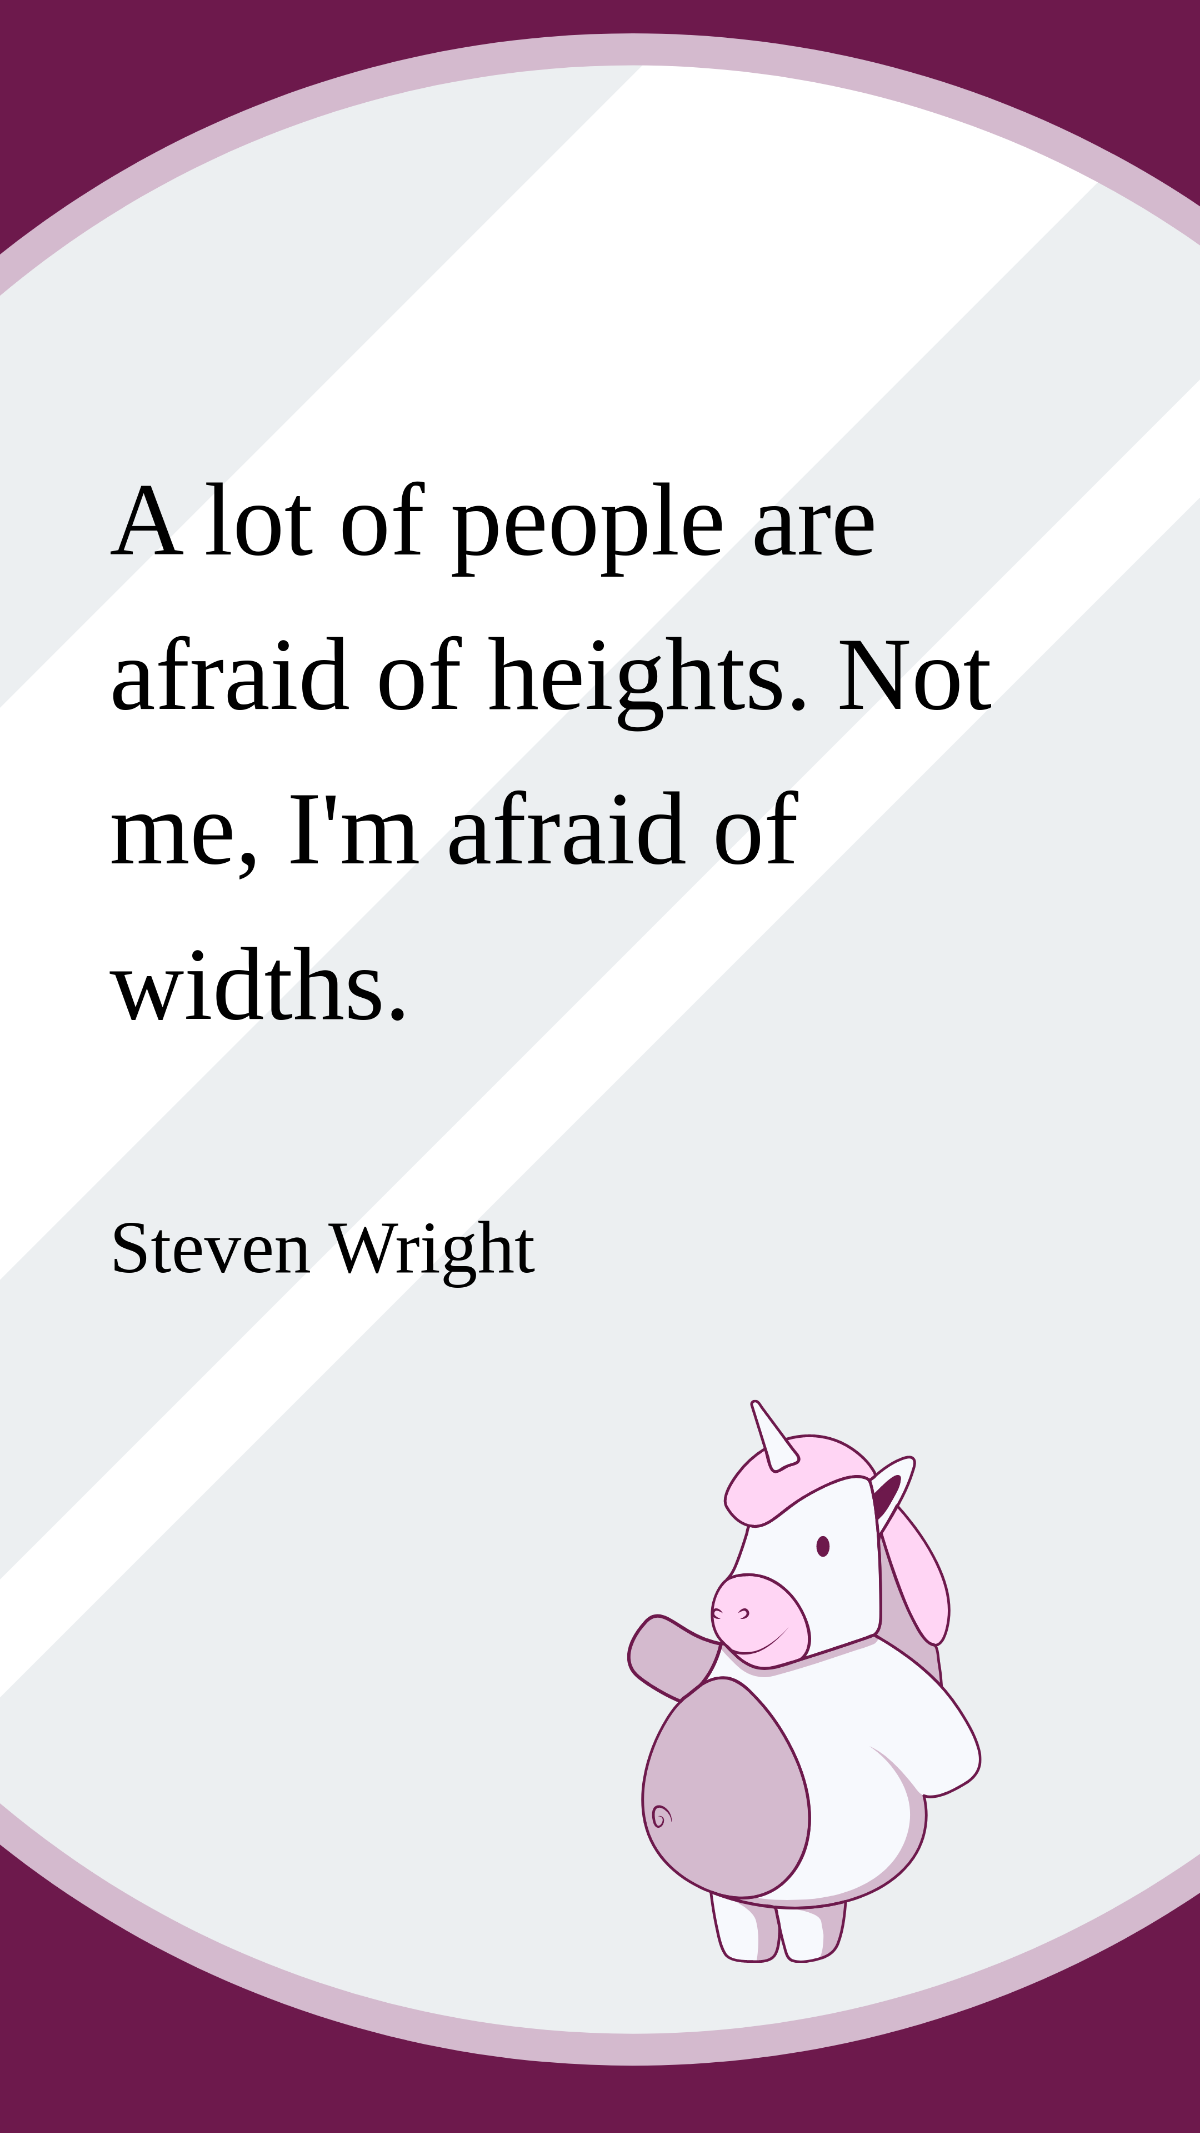 Steven Wright - A lot of people are afraid of heights. Not me, I'm afraid of widths. Template